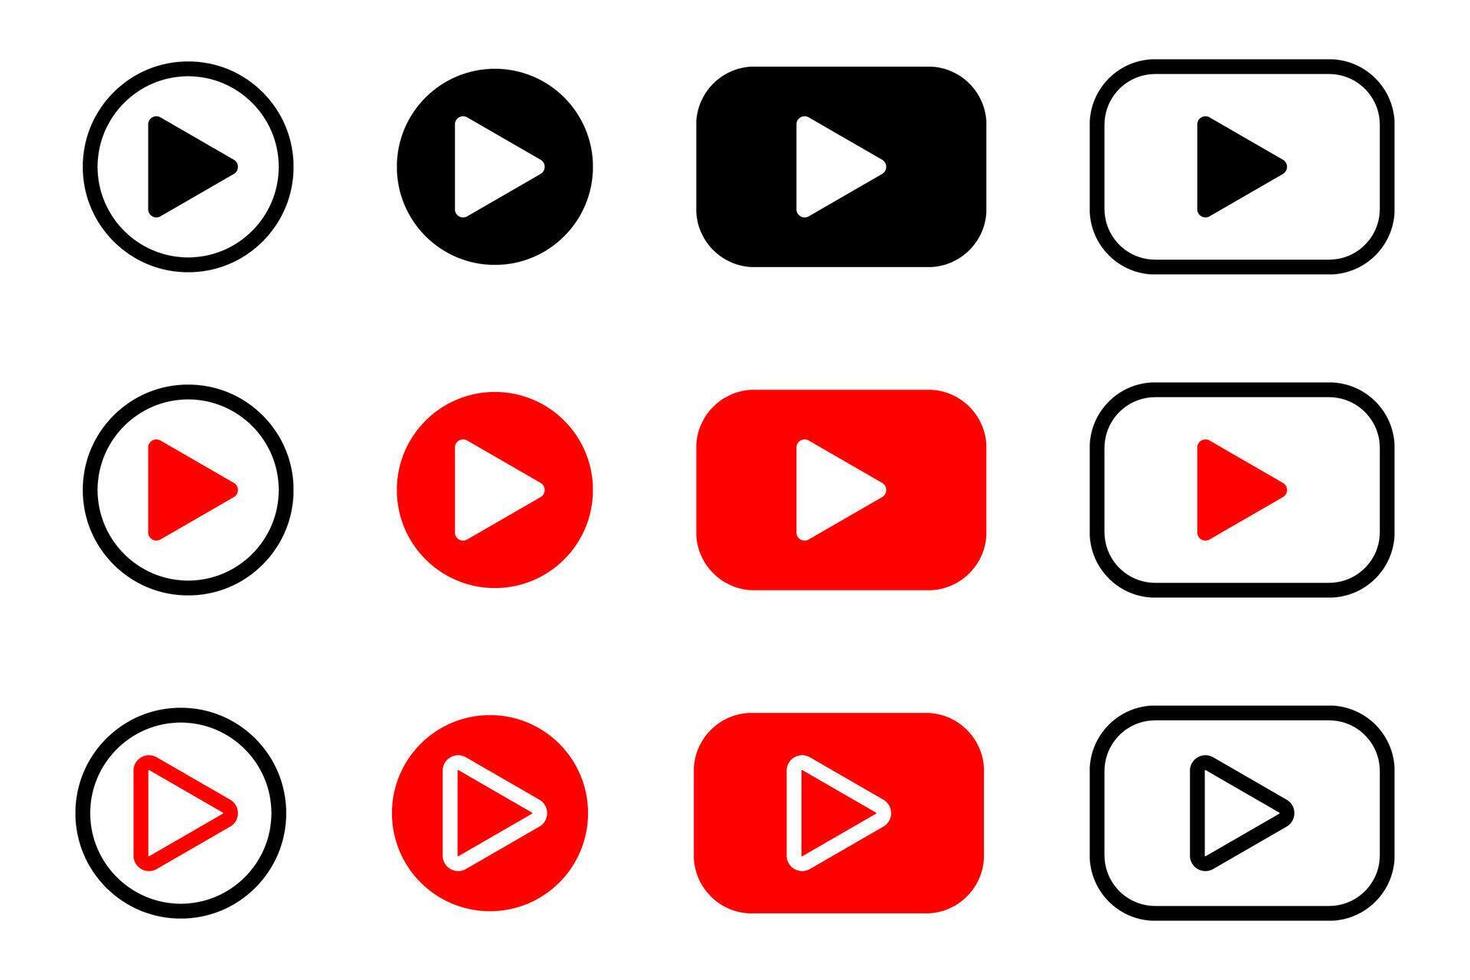 Play button icons of various shapes. vector